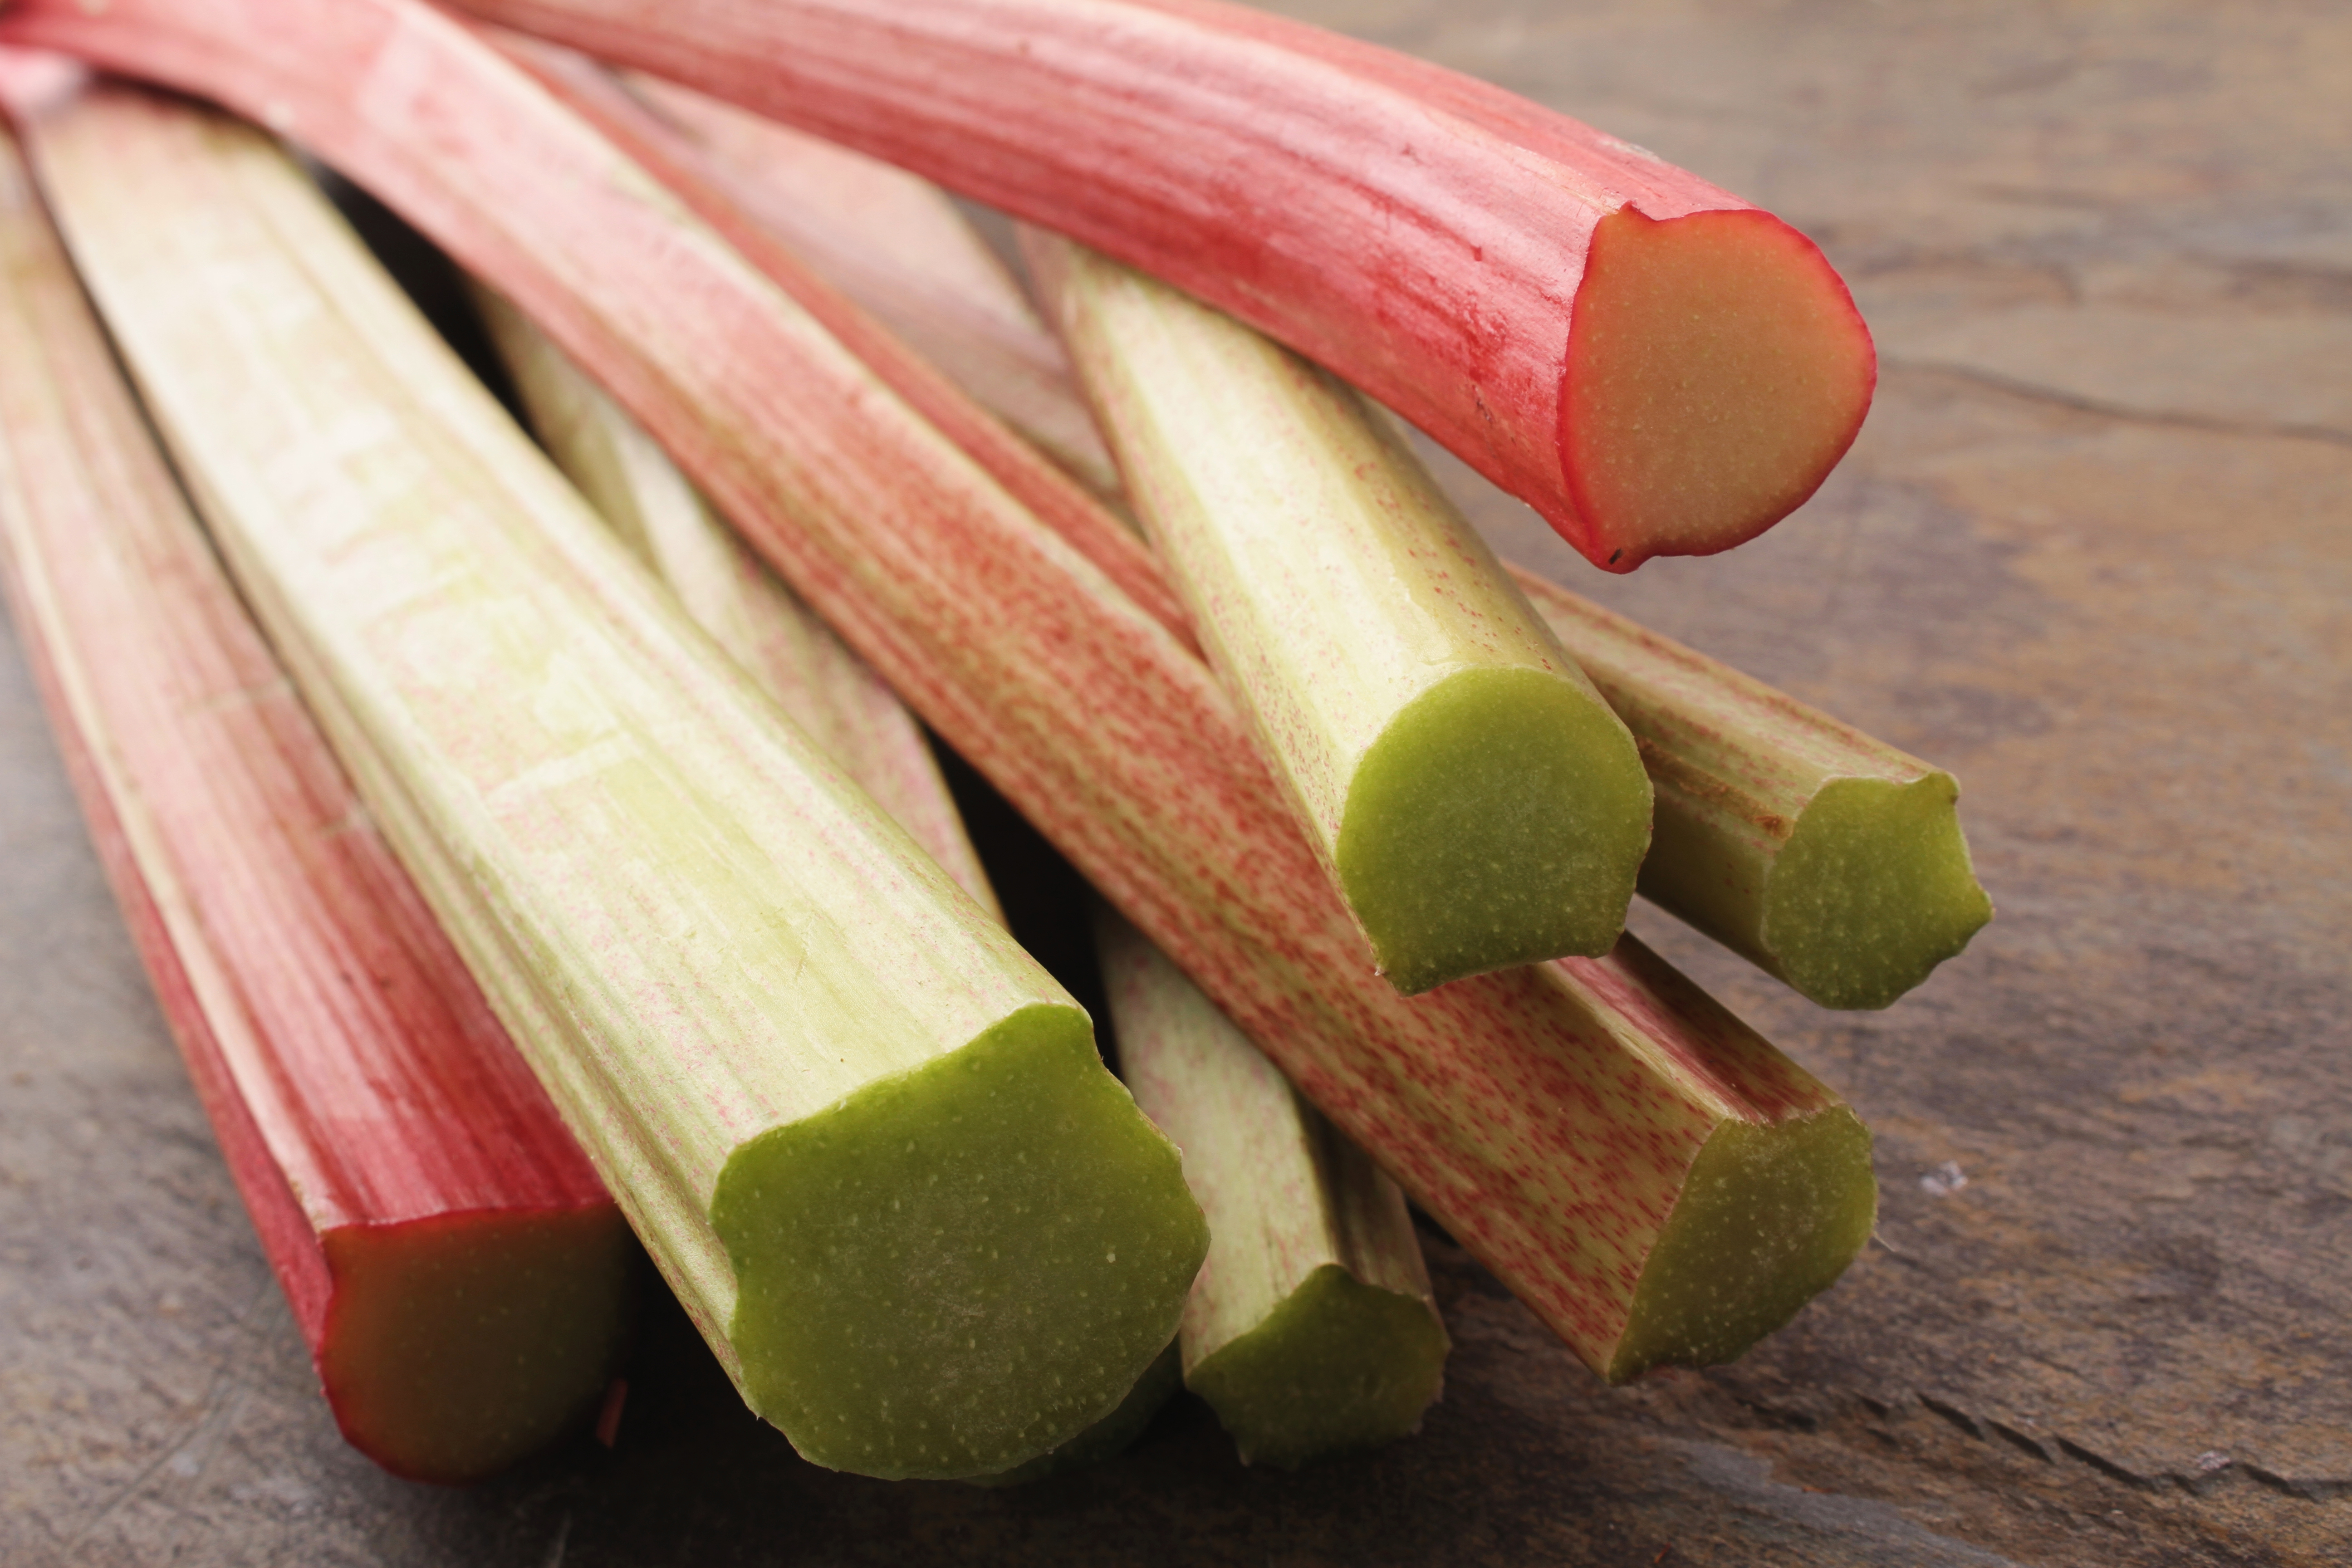 What Is Rhubarb? And What to Make with Rhubarb